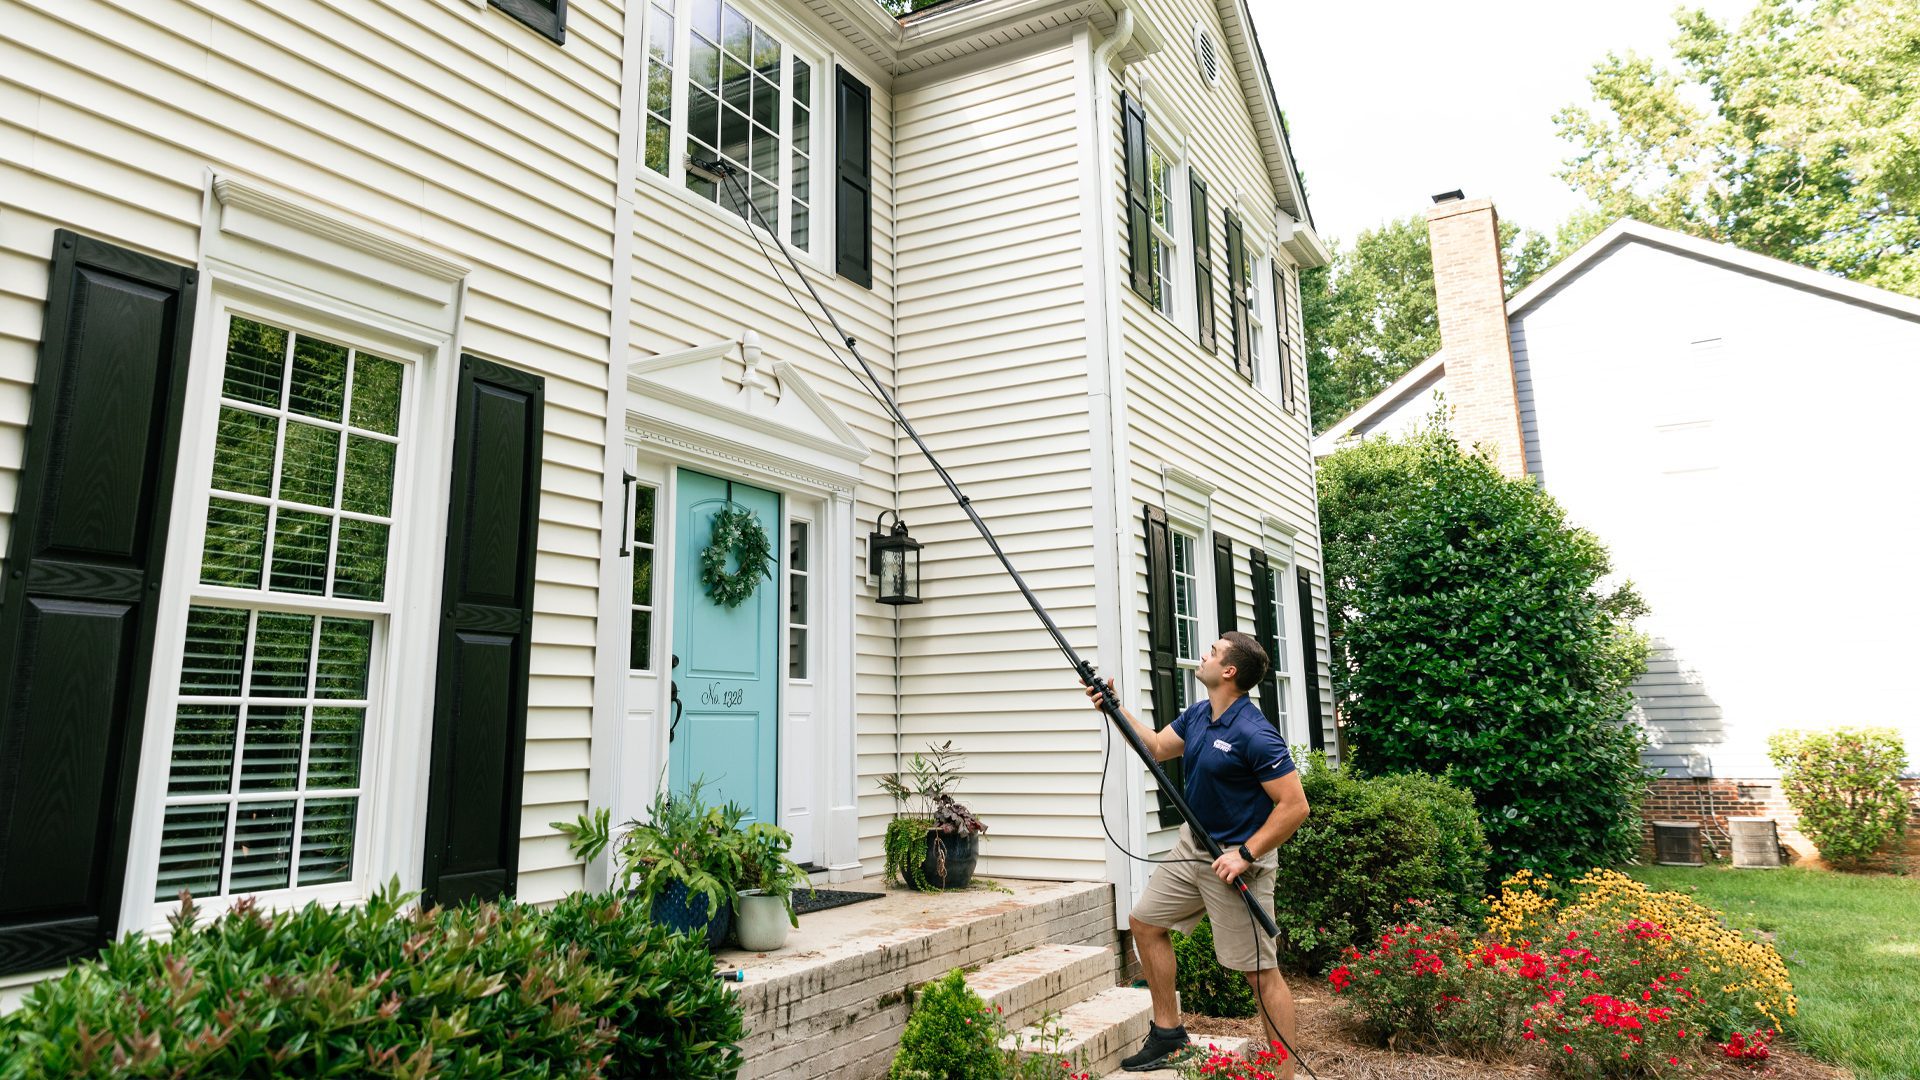 A Window Hero professional uses a telescopic tool to clean the second floor window of a large home.